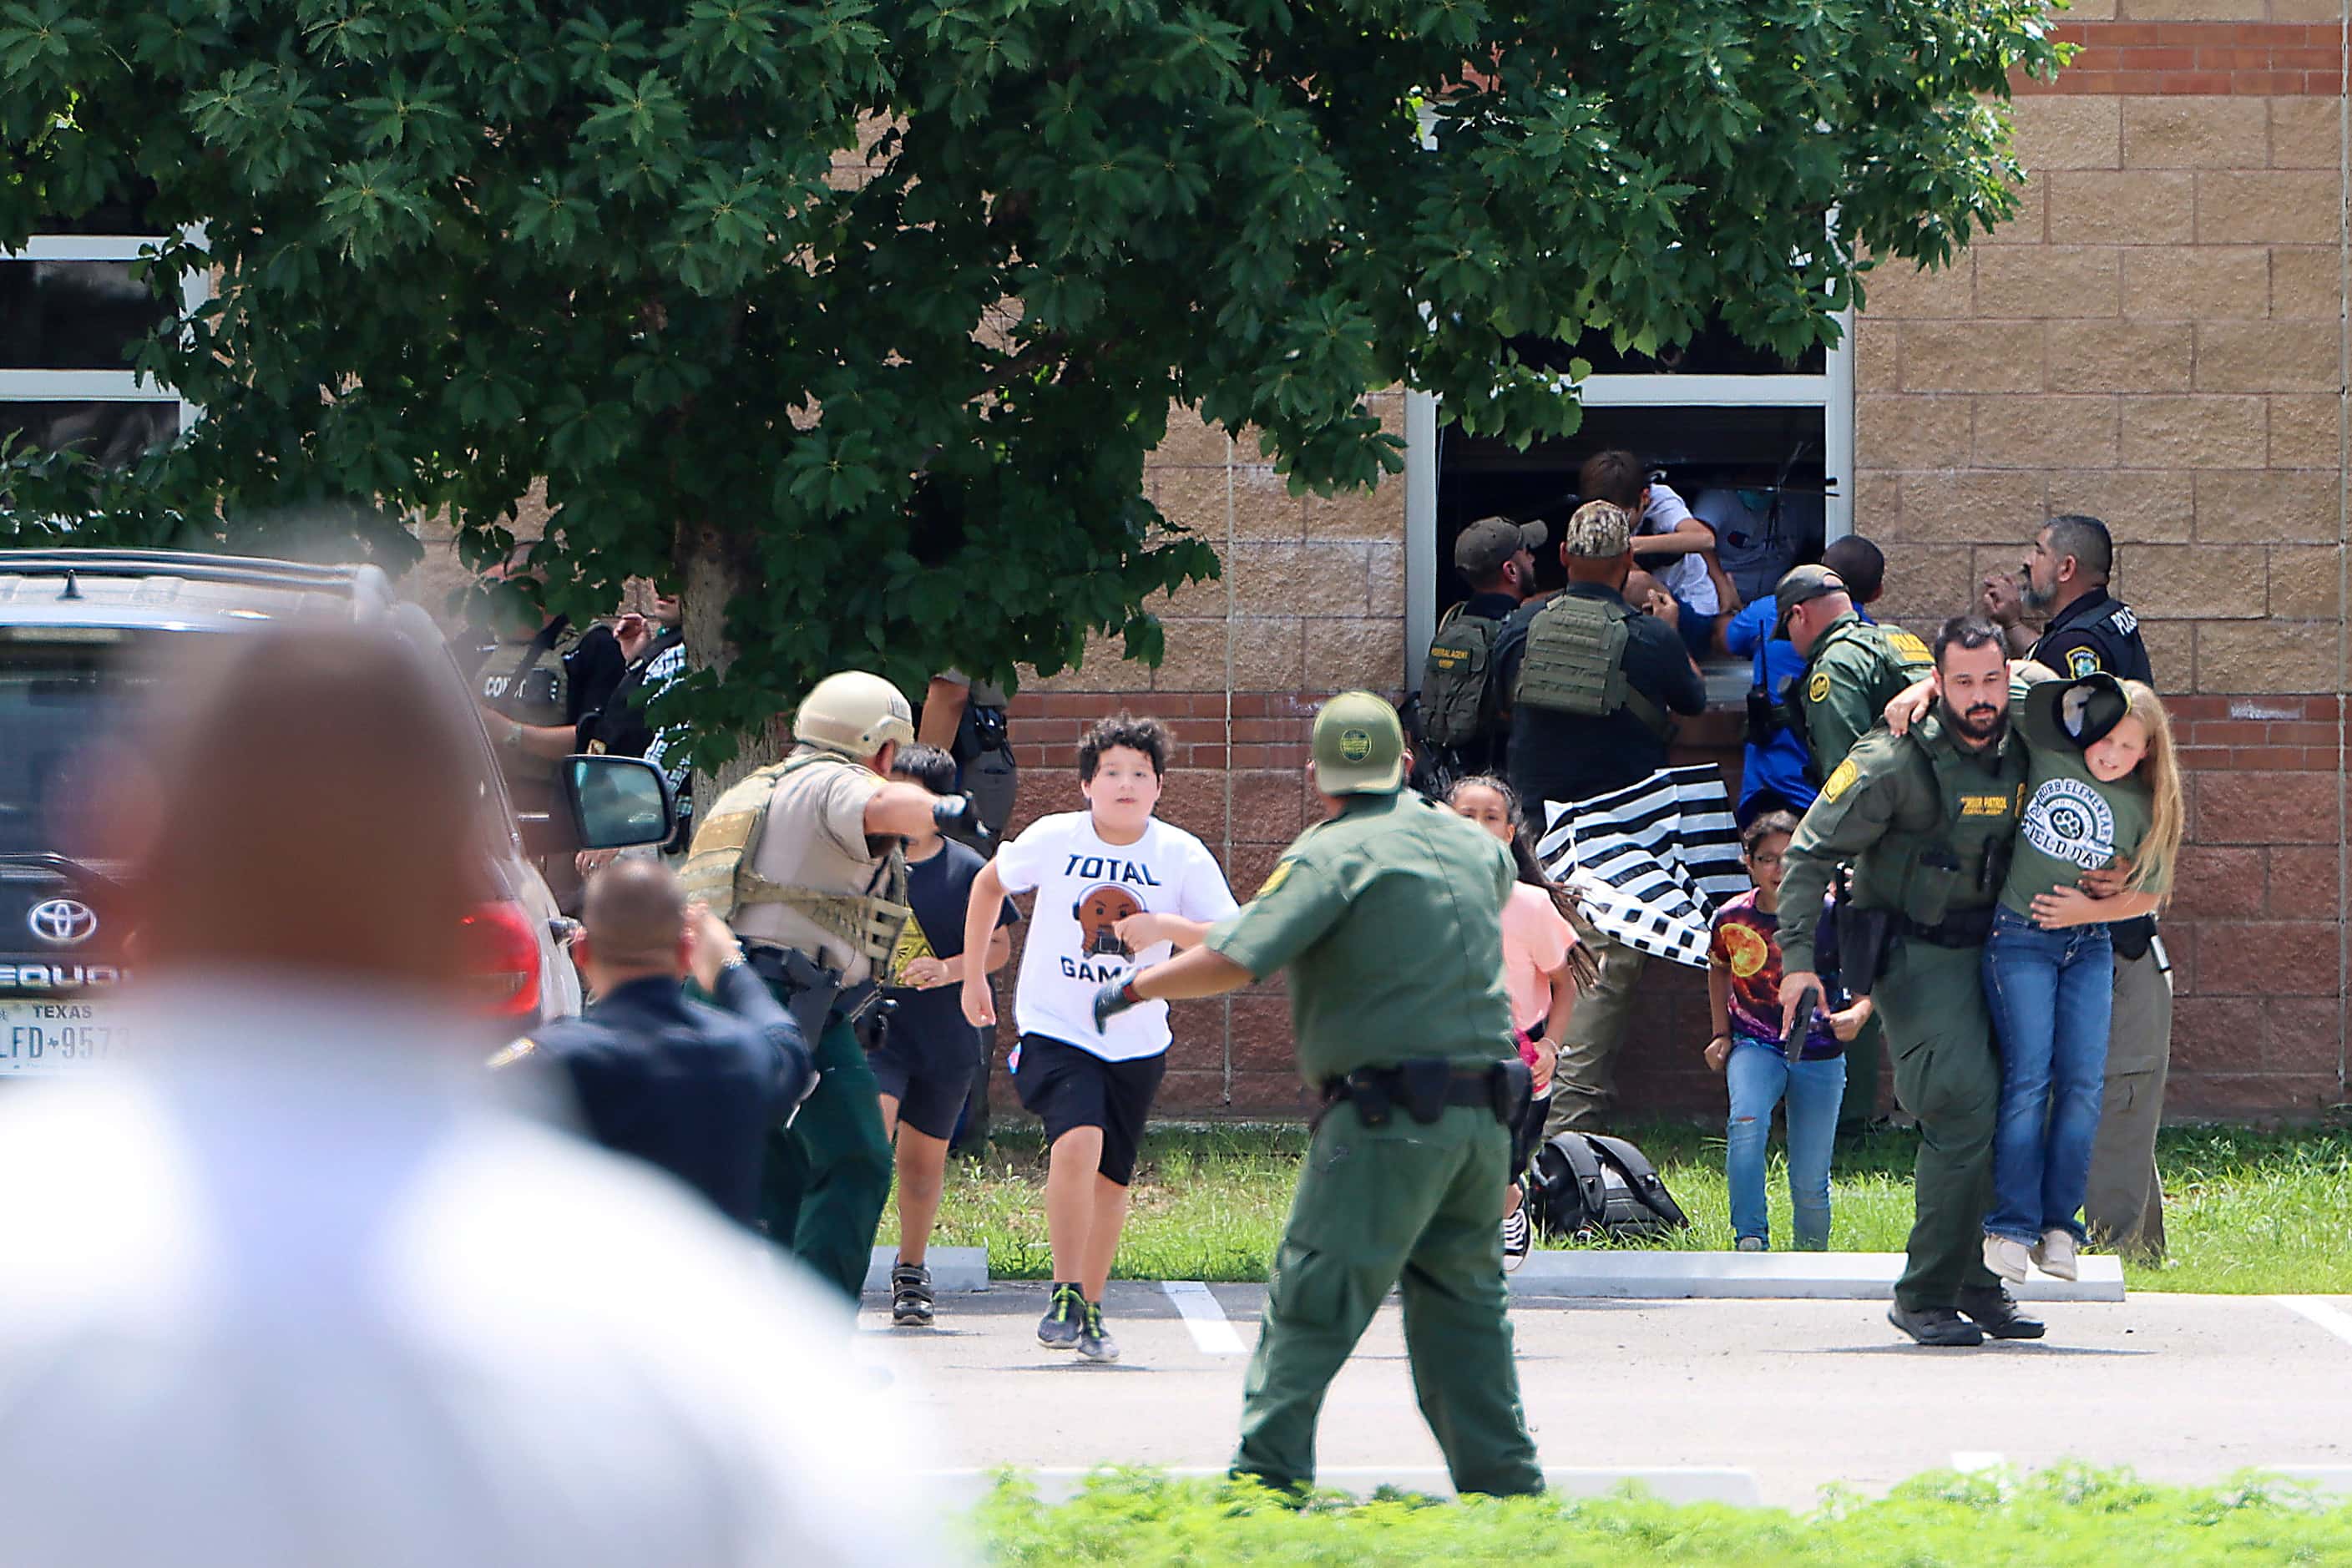 School children are evacuated by law enforcement officers through classroom windows in a...